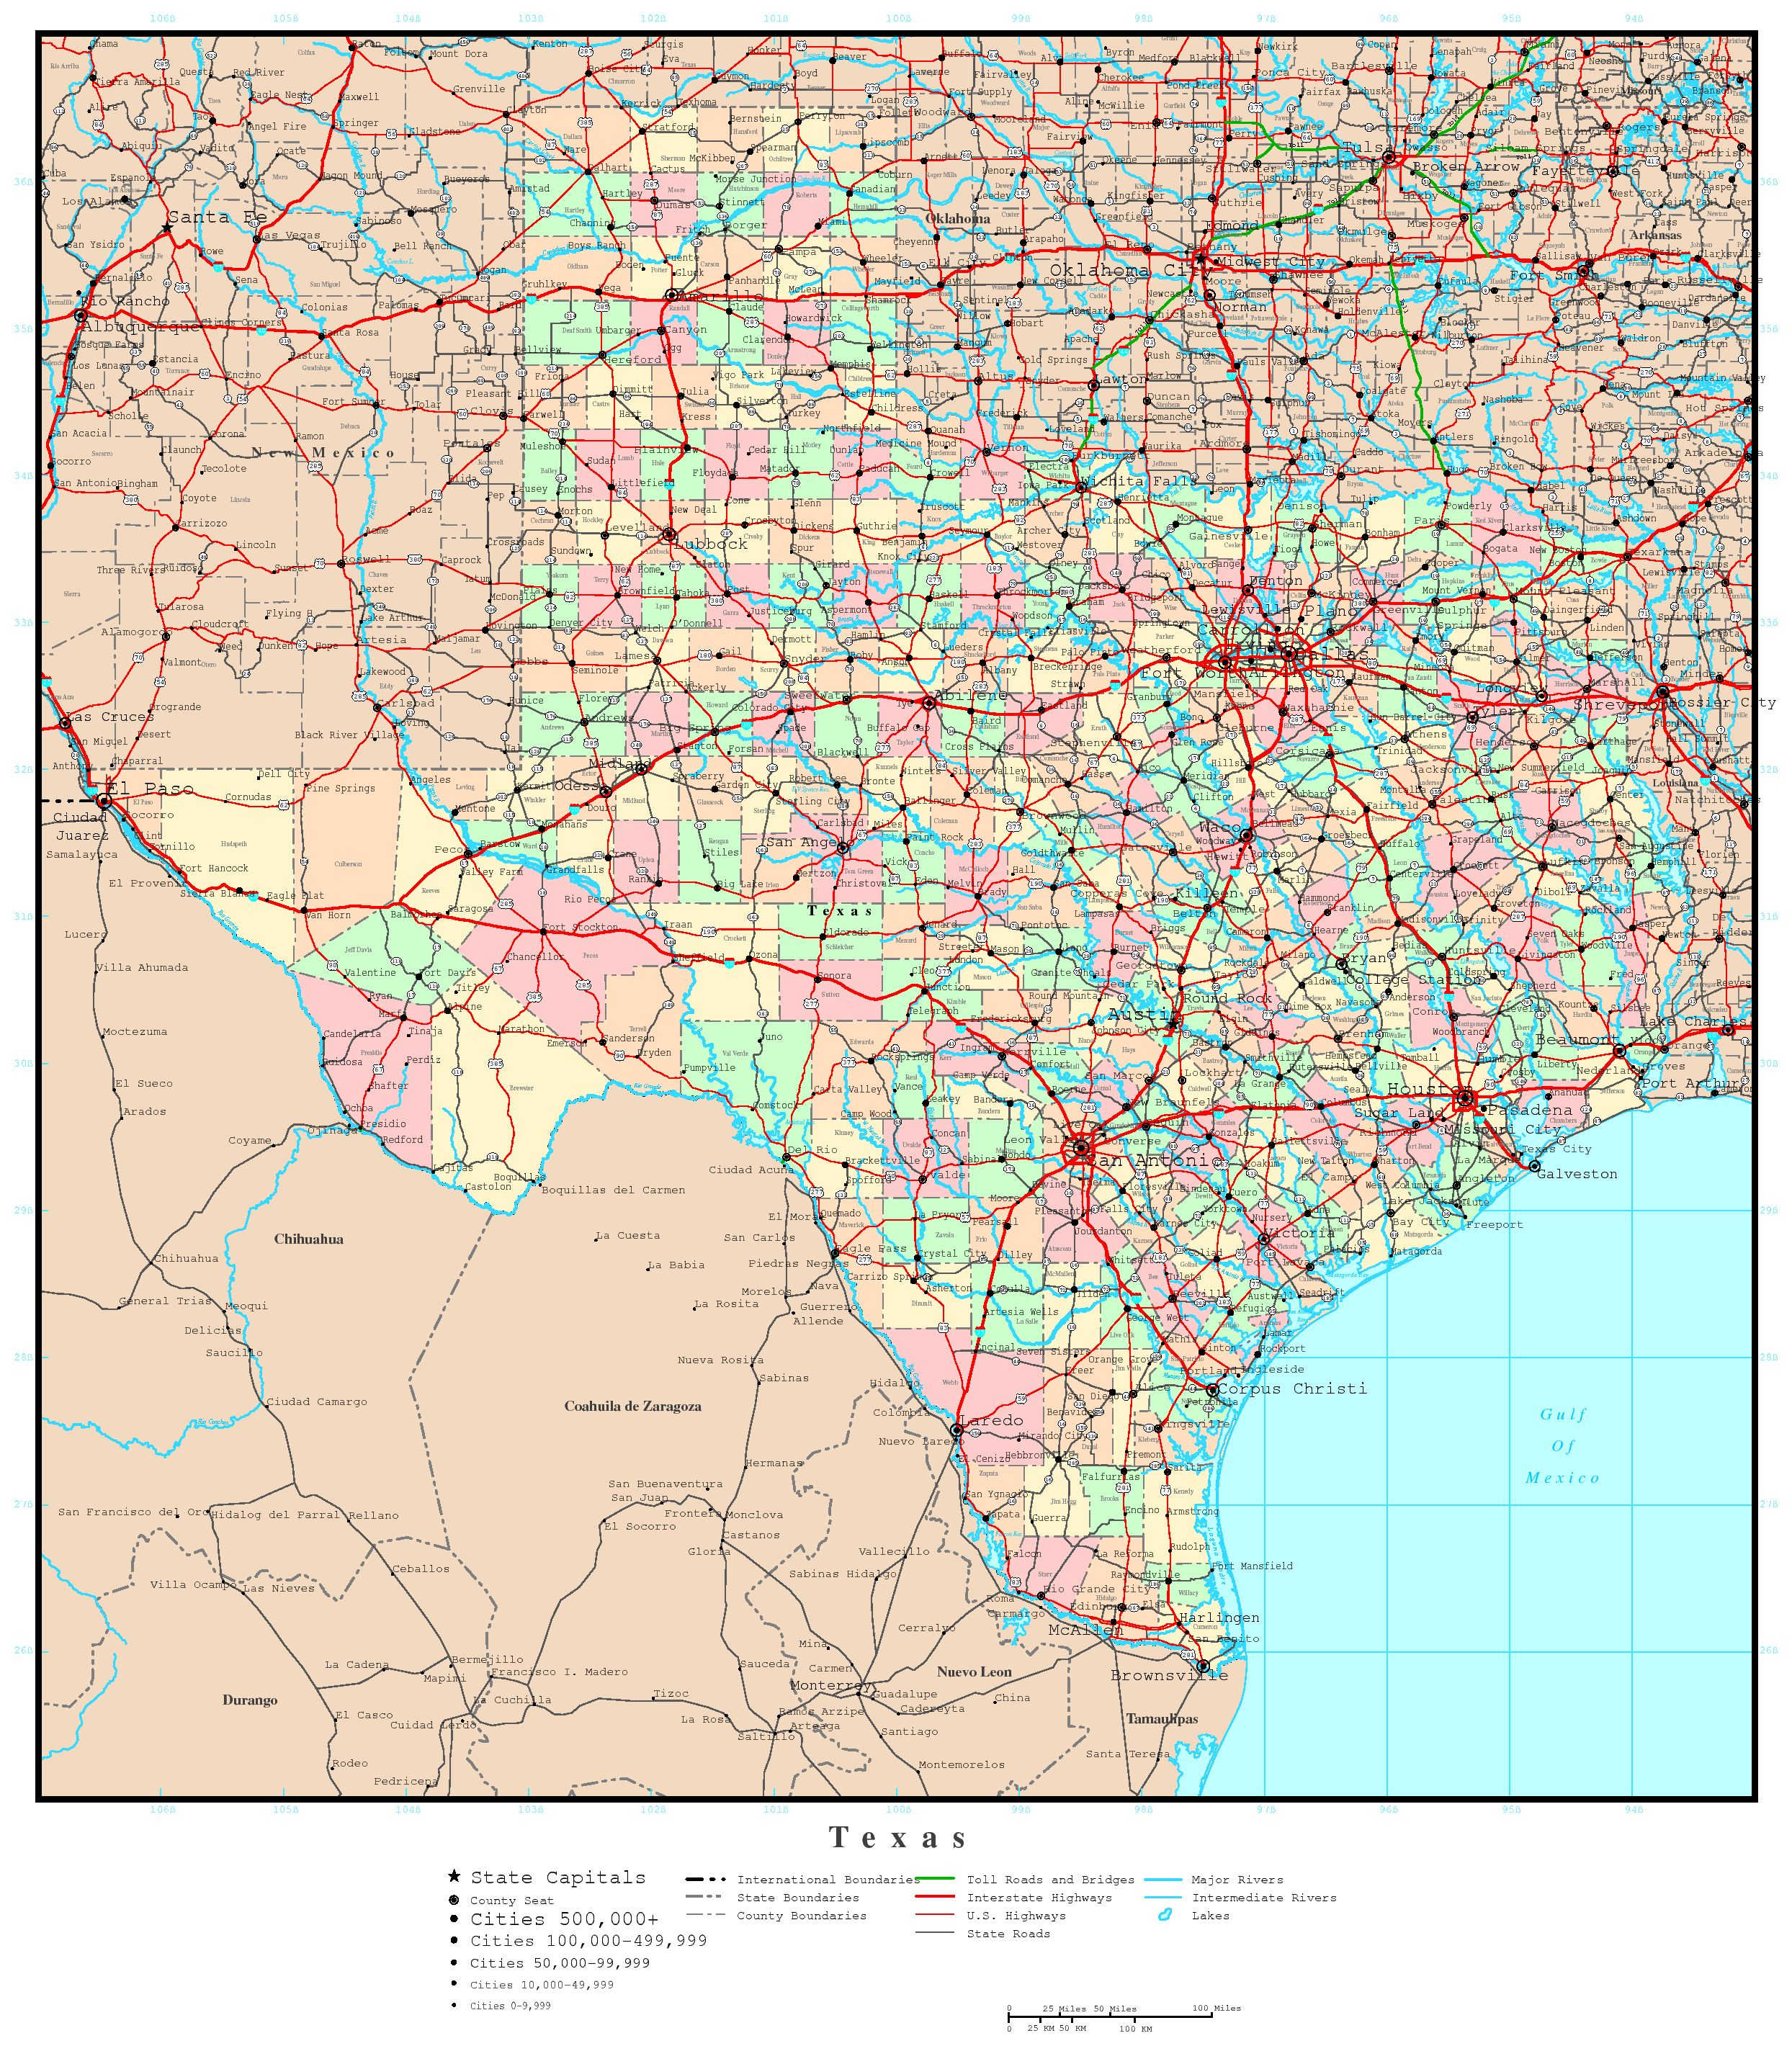 Texas Map - Online Maps Of Texas State - Complete Map Of Texas